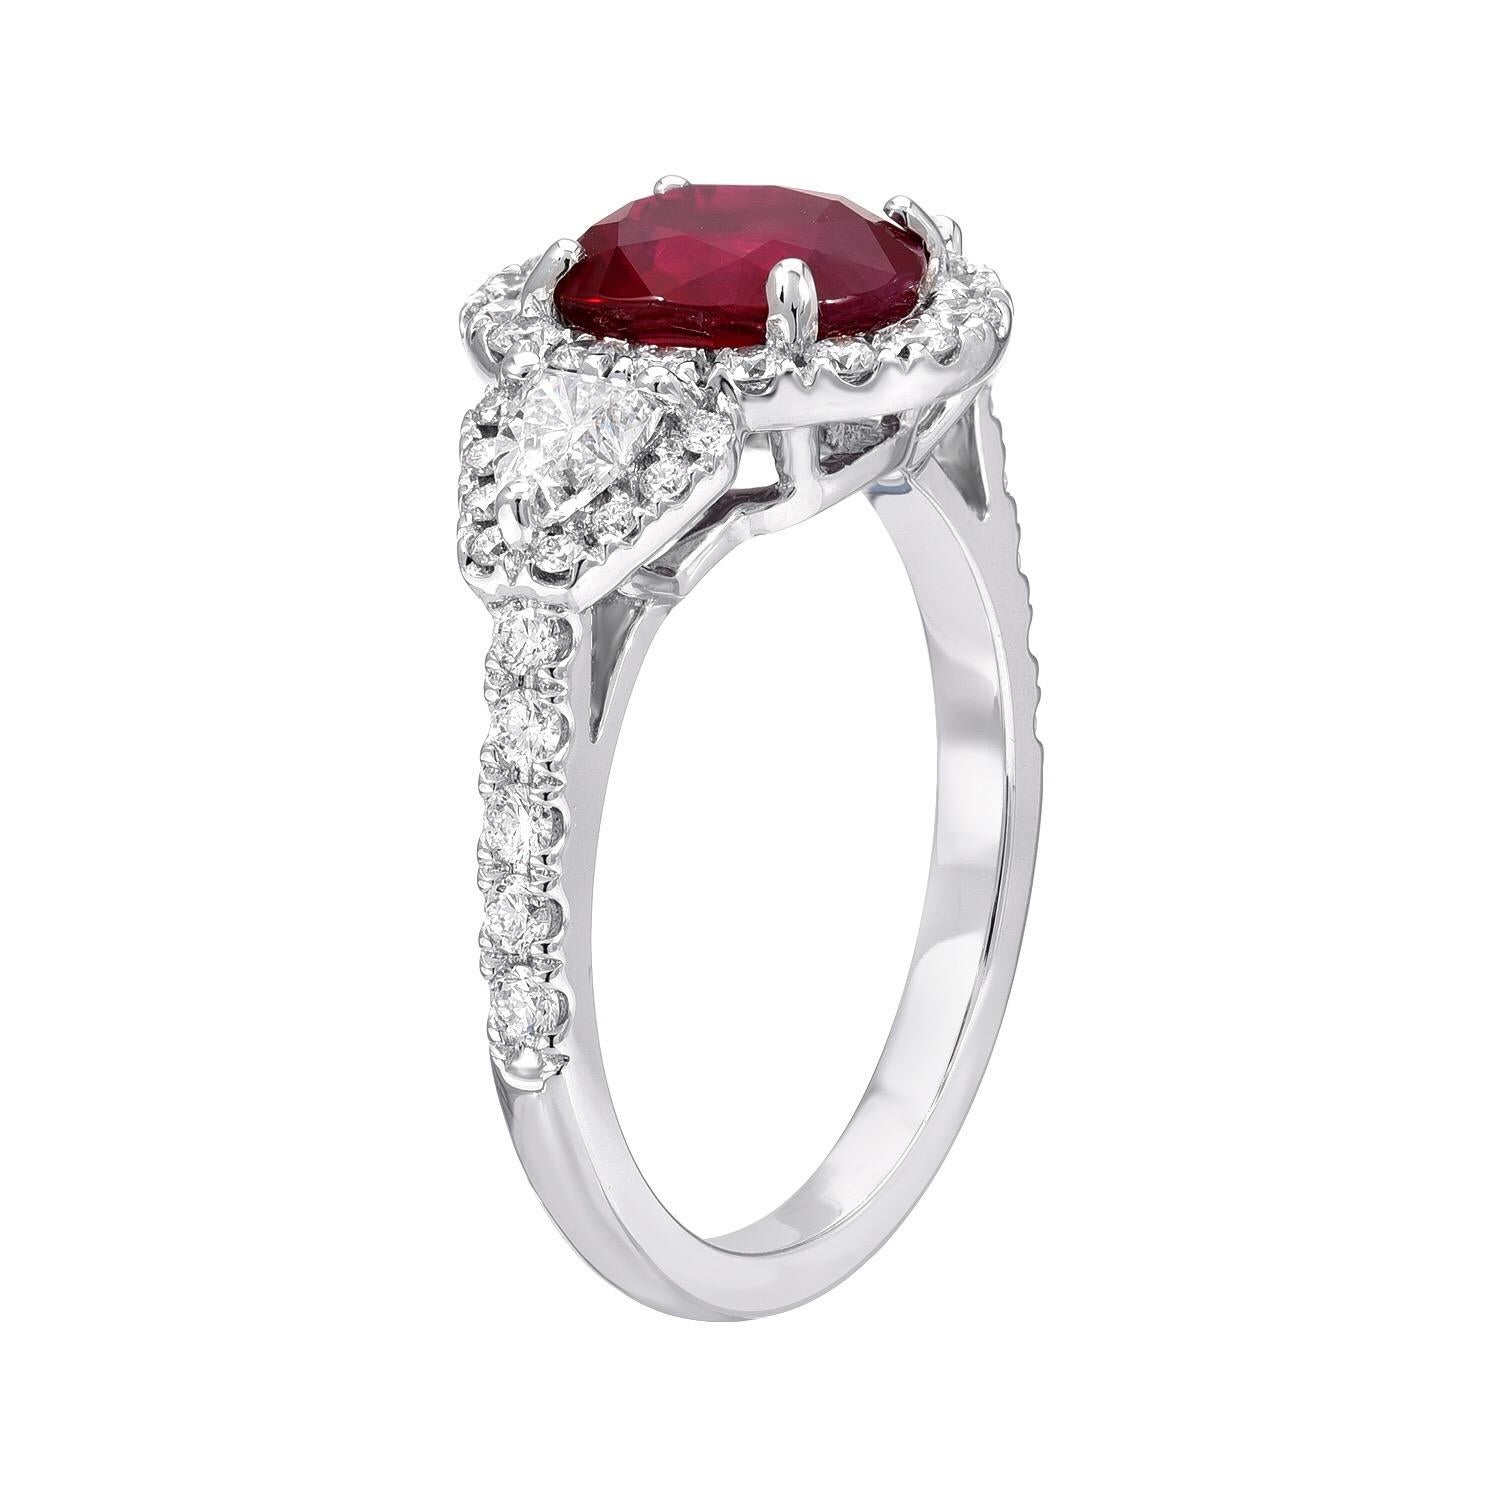 AGL certified, Burma Ruby oval, weighing a total of 2.36 carats, surrounded by a total of 0.64 carat diamonds in this very special 18K white gold ring.
Size 6.25. Re-sizing is complimentary upon request.
The AGL gem certificate is attached to the